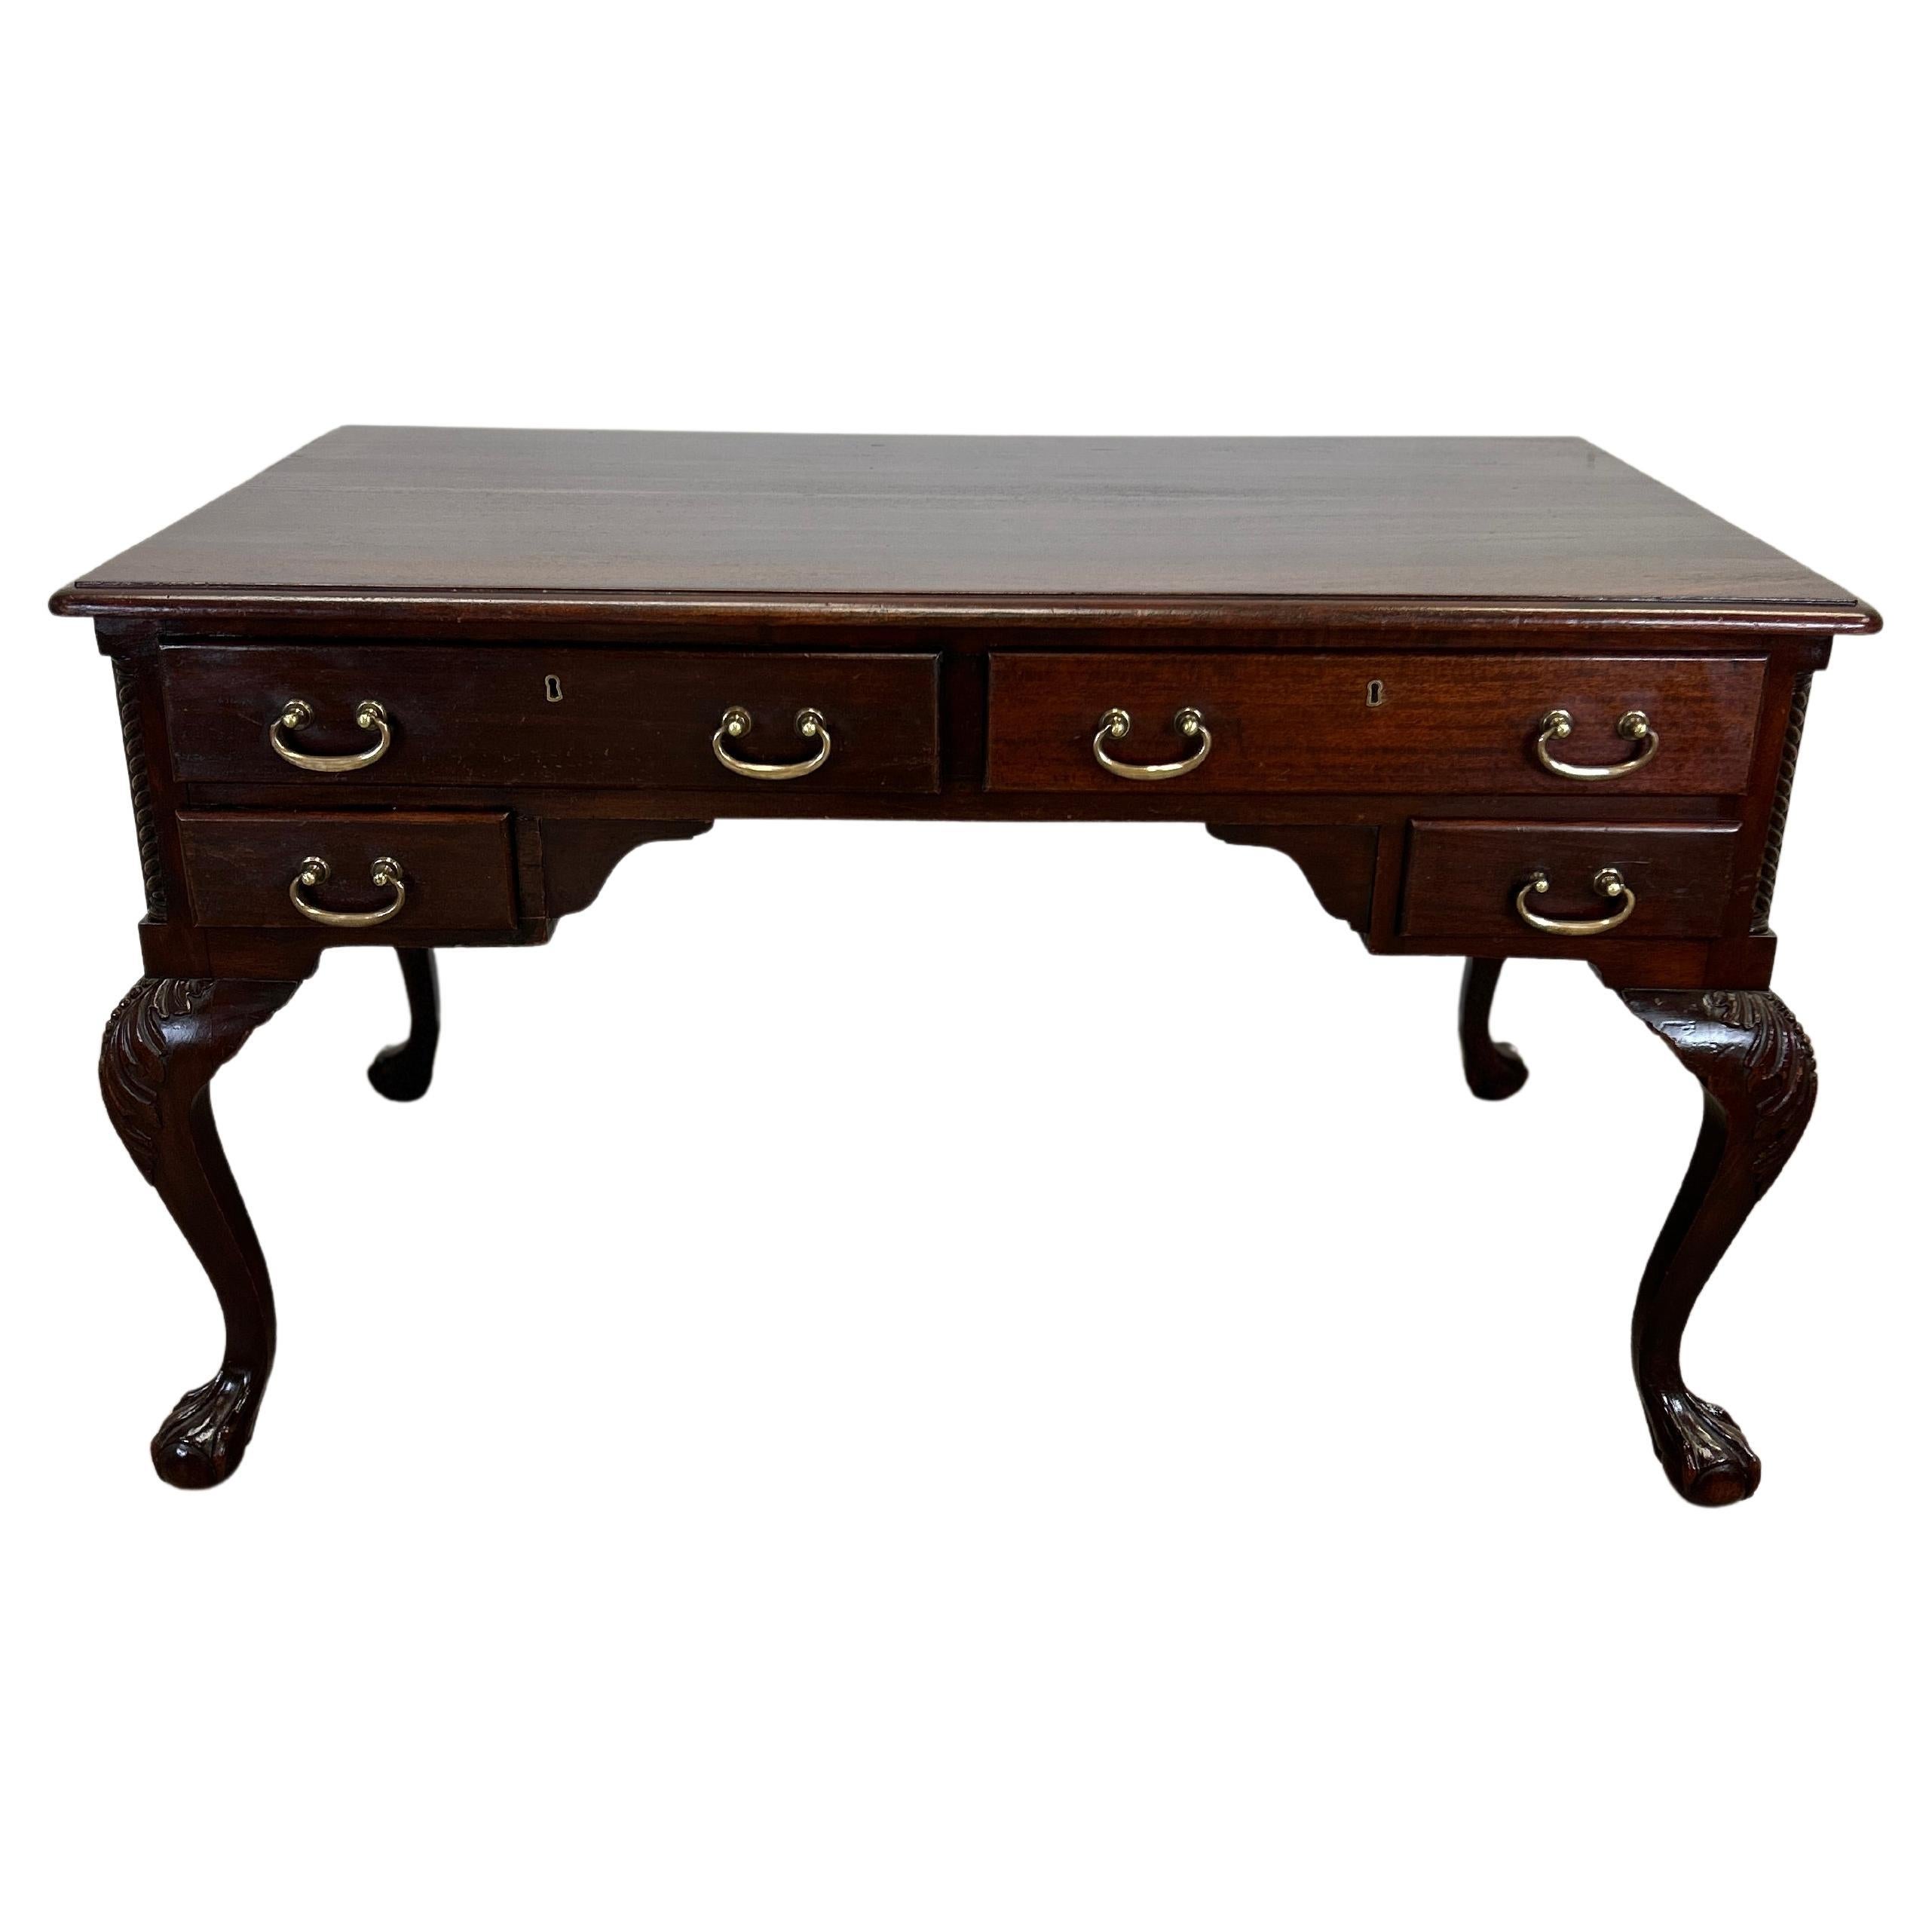 This 19th century American chippendale desk is a true masterpiece that will make a statement in any home or office. Made from solid mahogany, this desk features exquisite brass pulls and cabriolet legs with claw on ball feet, showcasing the